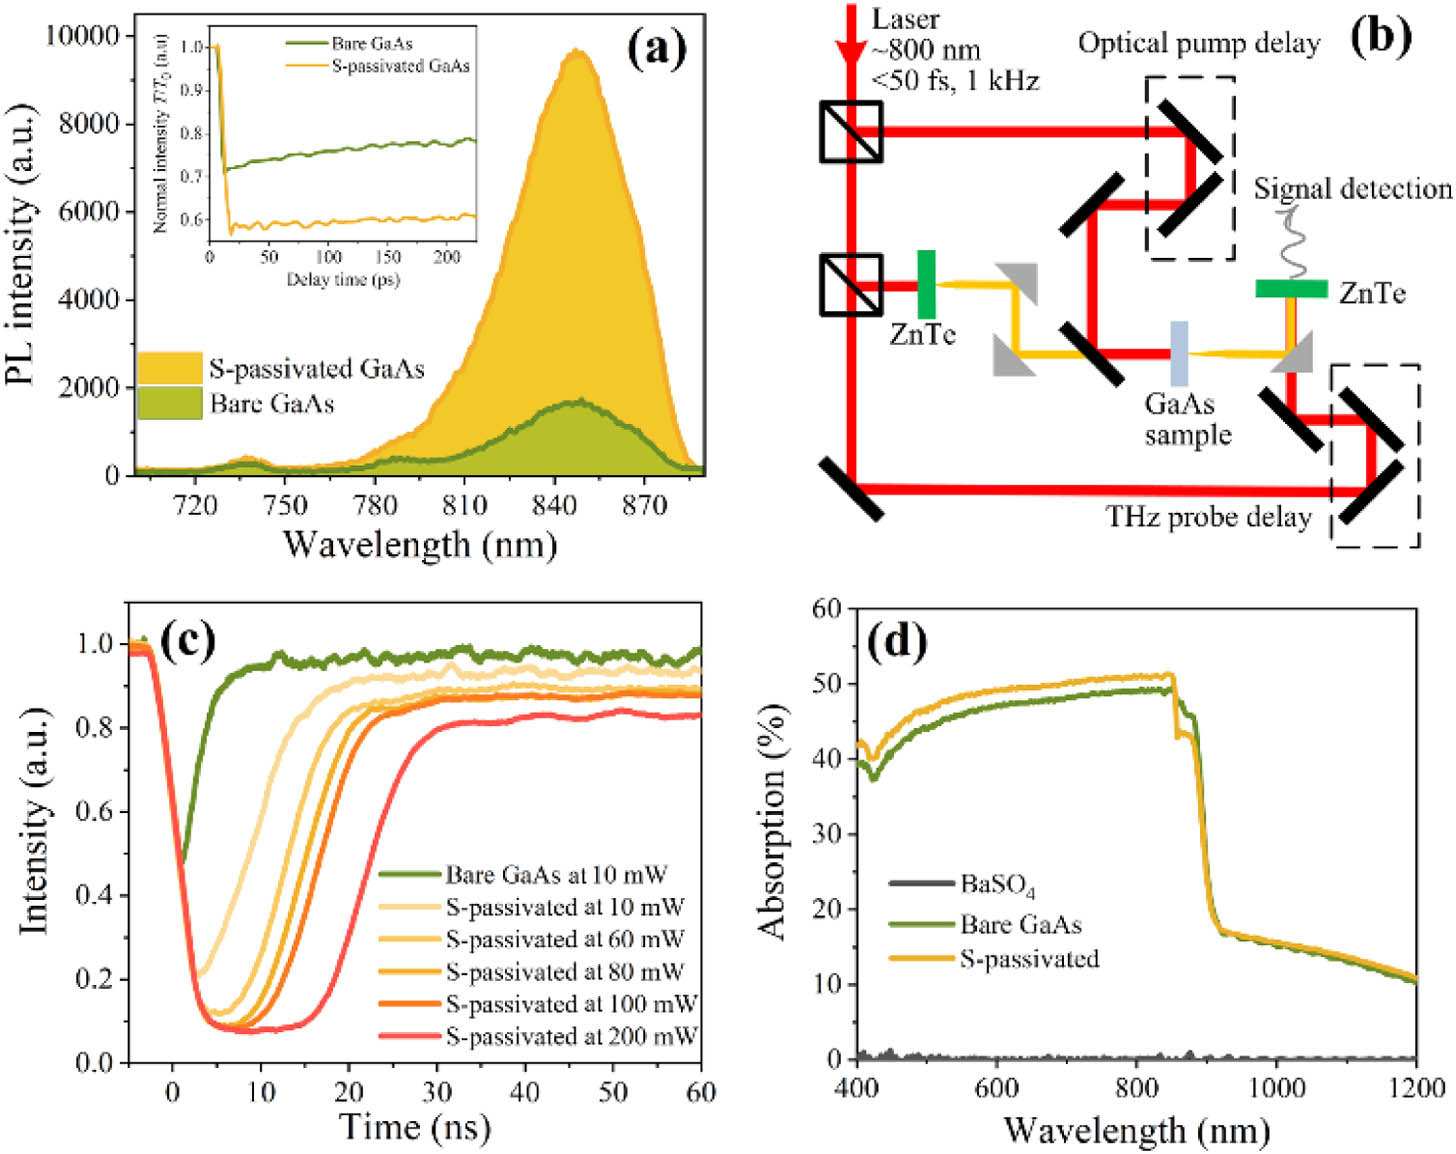 Characterization of GaAs wafers before and after surface passivation. (a) PL spectra (inset: time-resolved THz transmission for the S-passivated GaAs and the reference bare GaAs measured at a low fluence of 3 mW); (b) schematic of the home-made OPTP setup; (c) response waveform of the bare and S-passivated GaAs based modulators to one pulse of the laser under different power levels; and (d) measured UV/VIS/IR absorption spectra.